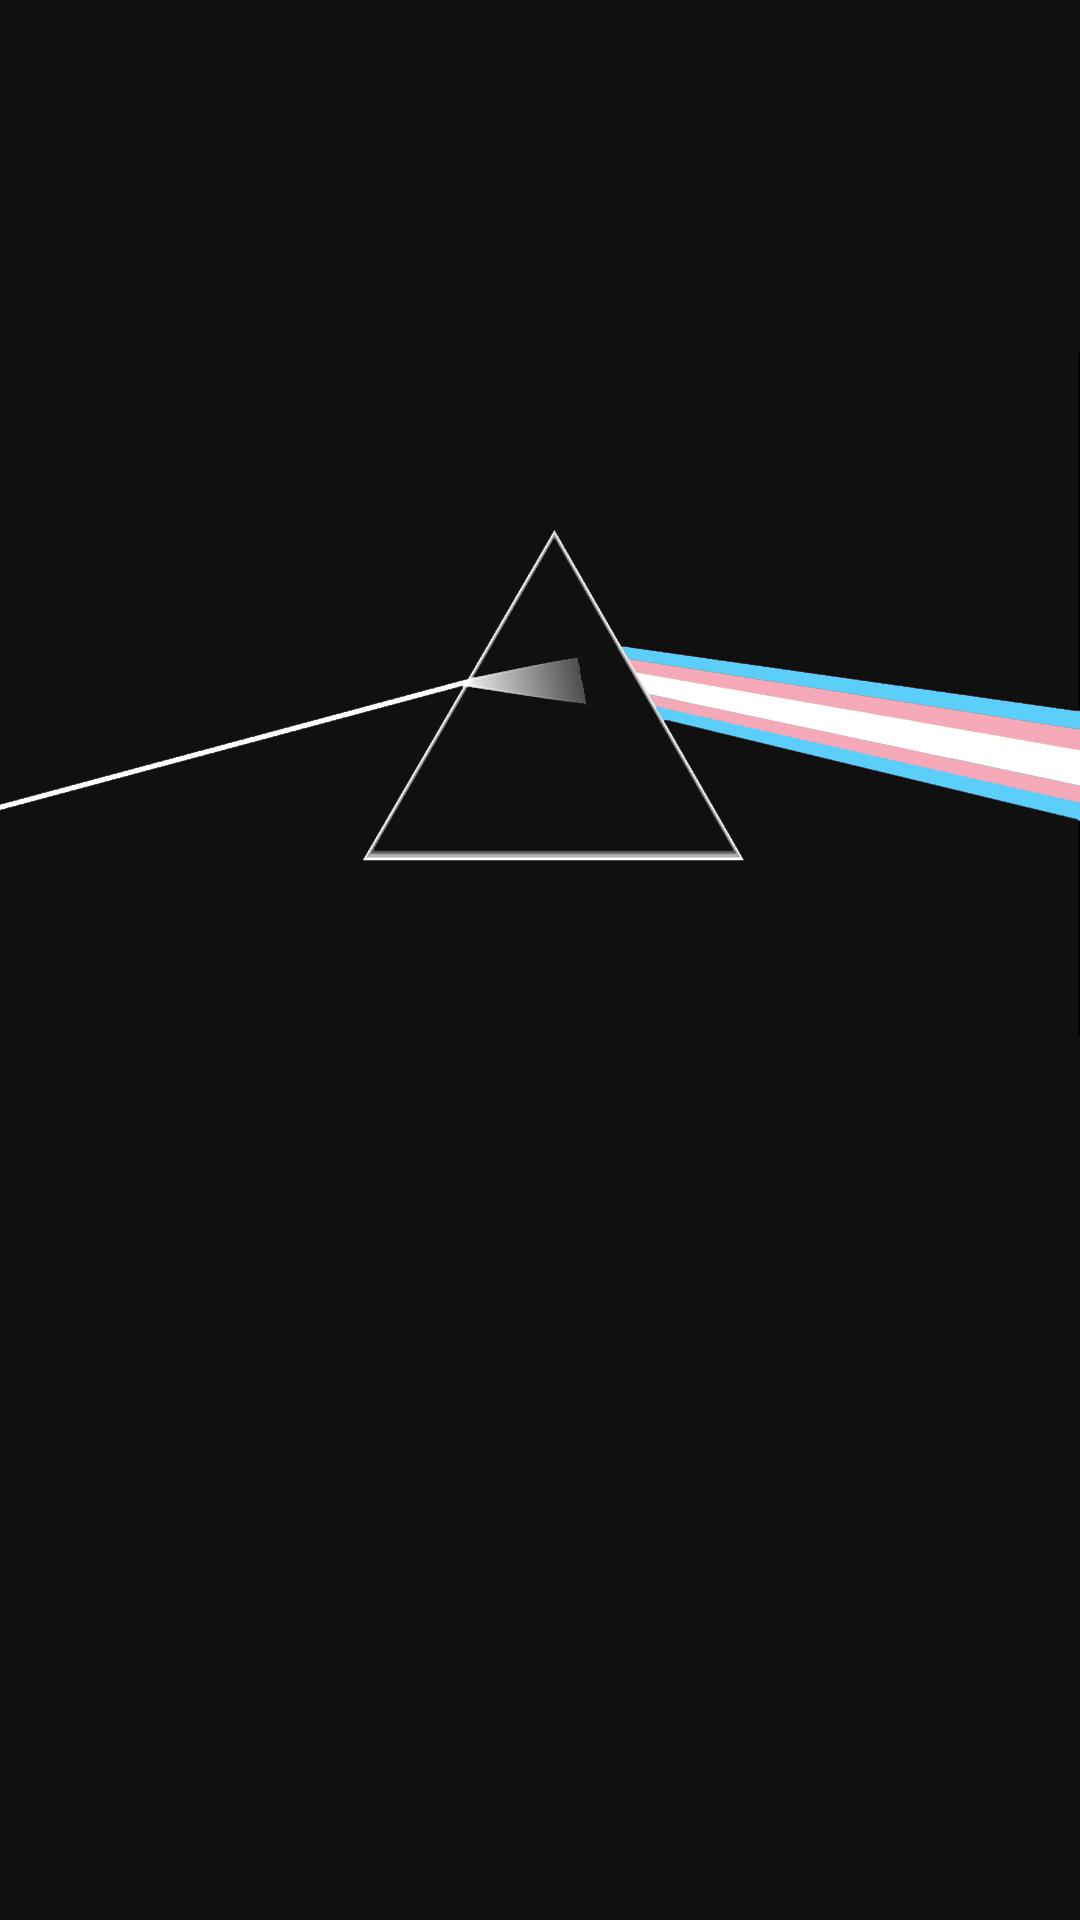 I made a Trans Side of the Moon phone wallpaper for you